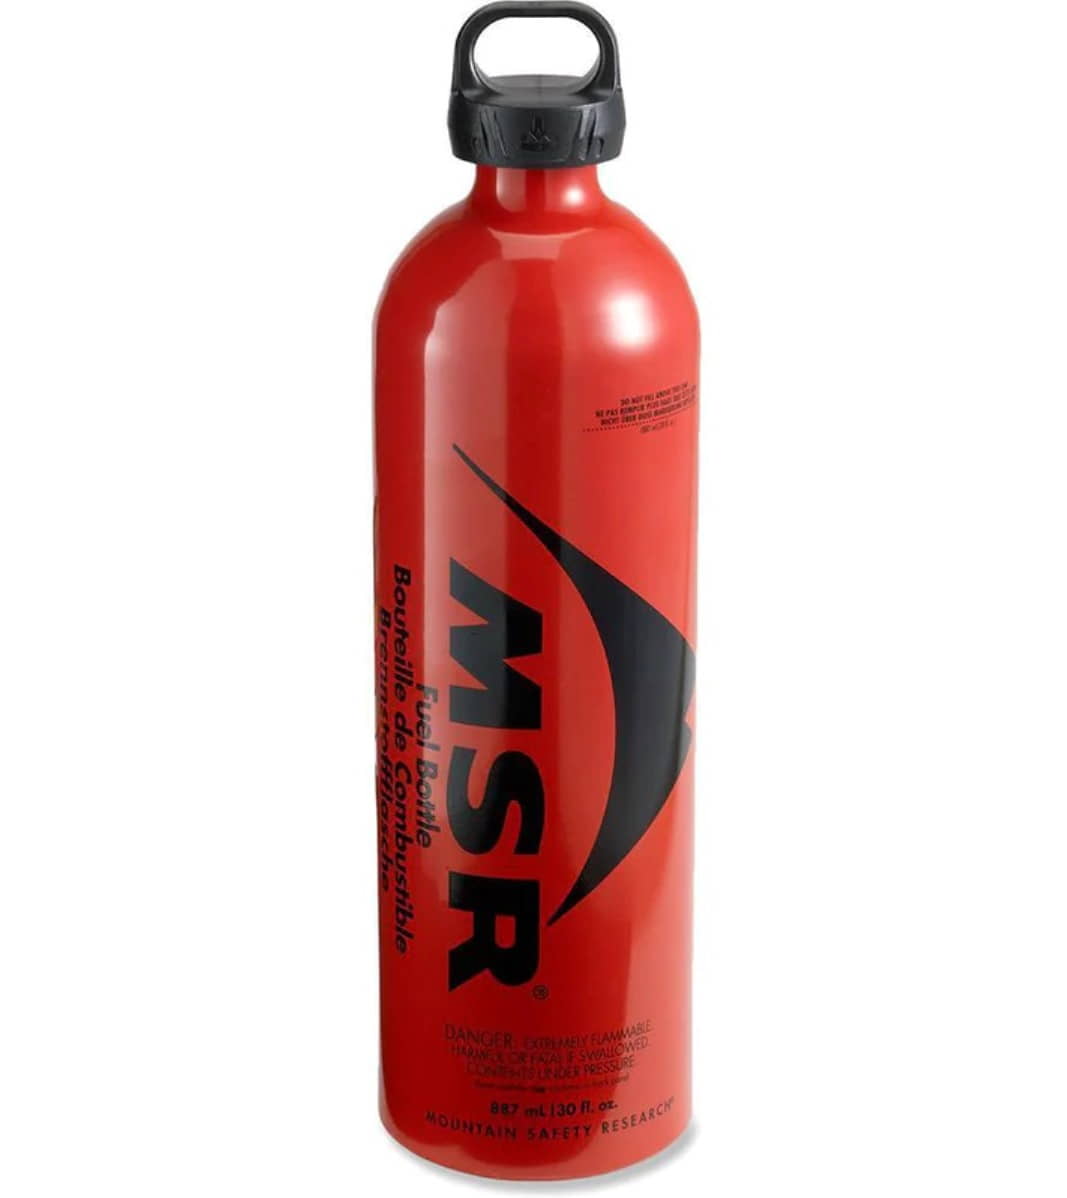 MSR, MSR Fuel Bottle With Crp Cap (30 Fl. Oz.) MSR Fuel Bottle With Crp Cap (30 Fl. Oz.) 11832, accessories, adventure bike luggage, adventure luggage, dirt bike luggage, dirtbike luggage, enduristan, enduristan uk, enduro luggage, fuel-bottle, luggage, motorbike bags, motorbike luggage, off road luggage, Accessories, - The World’s Toughest Waterproof Luggage for Adventure Bikes. Imported and distributed in North & South America by Lindeco Genuine Powersports.